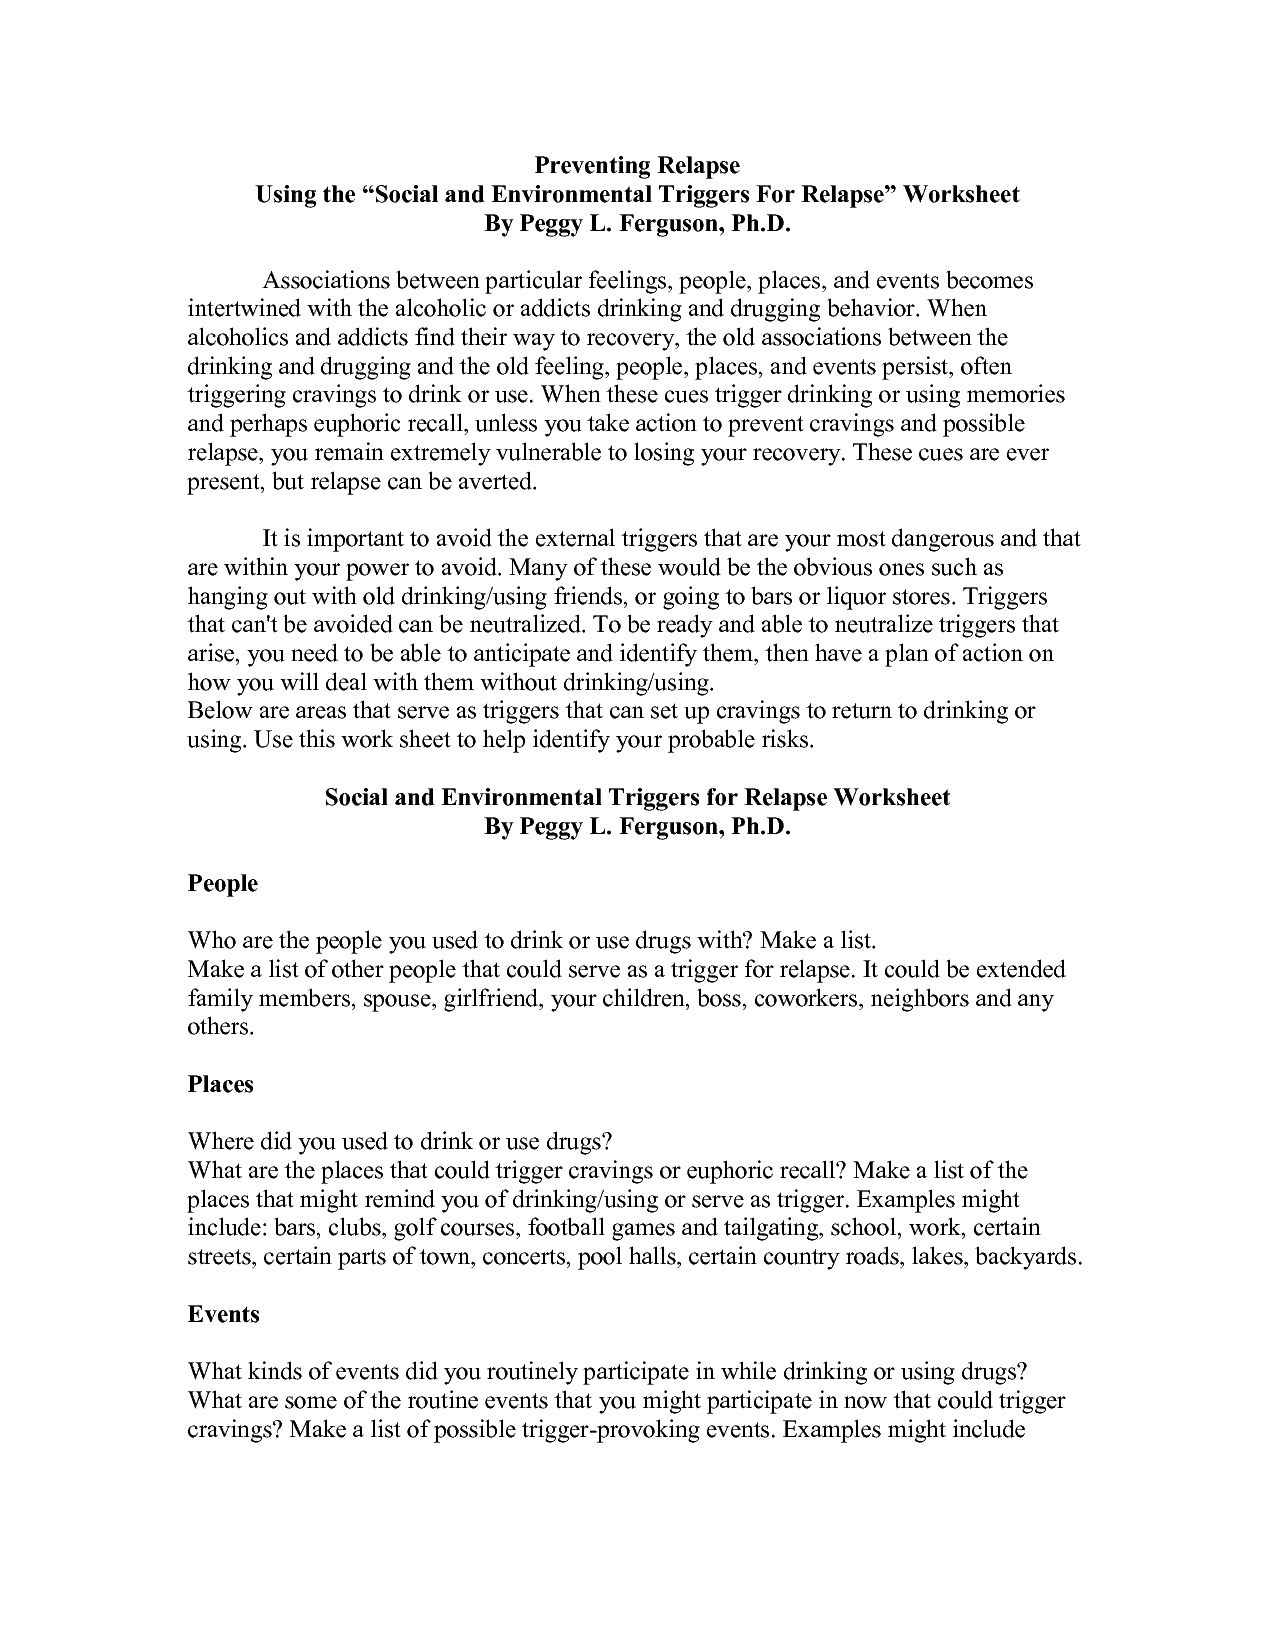 18 Best Images of Recovery And Relapse Worksheet - Relapse Prevention